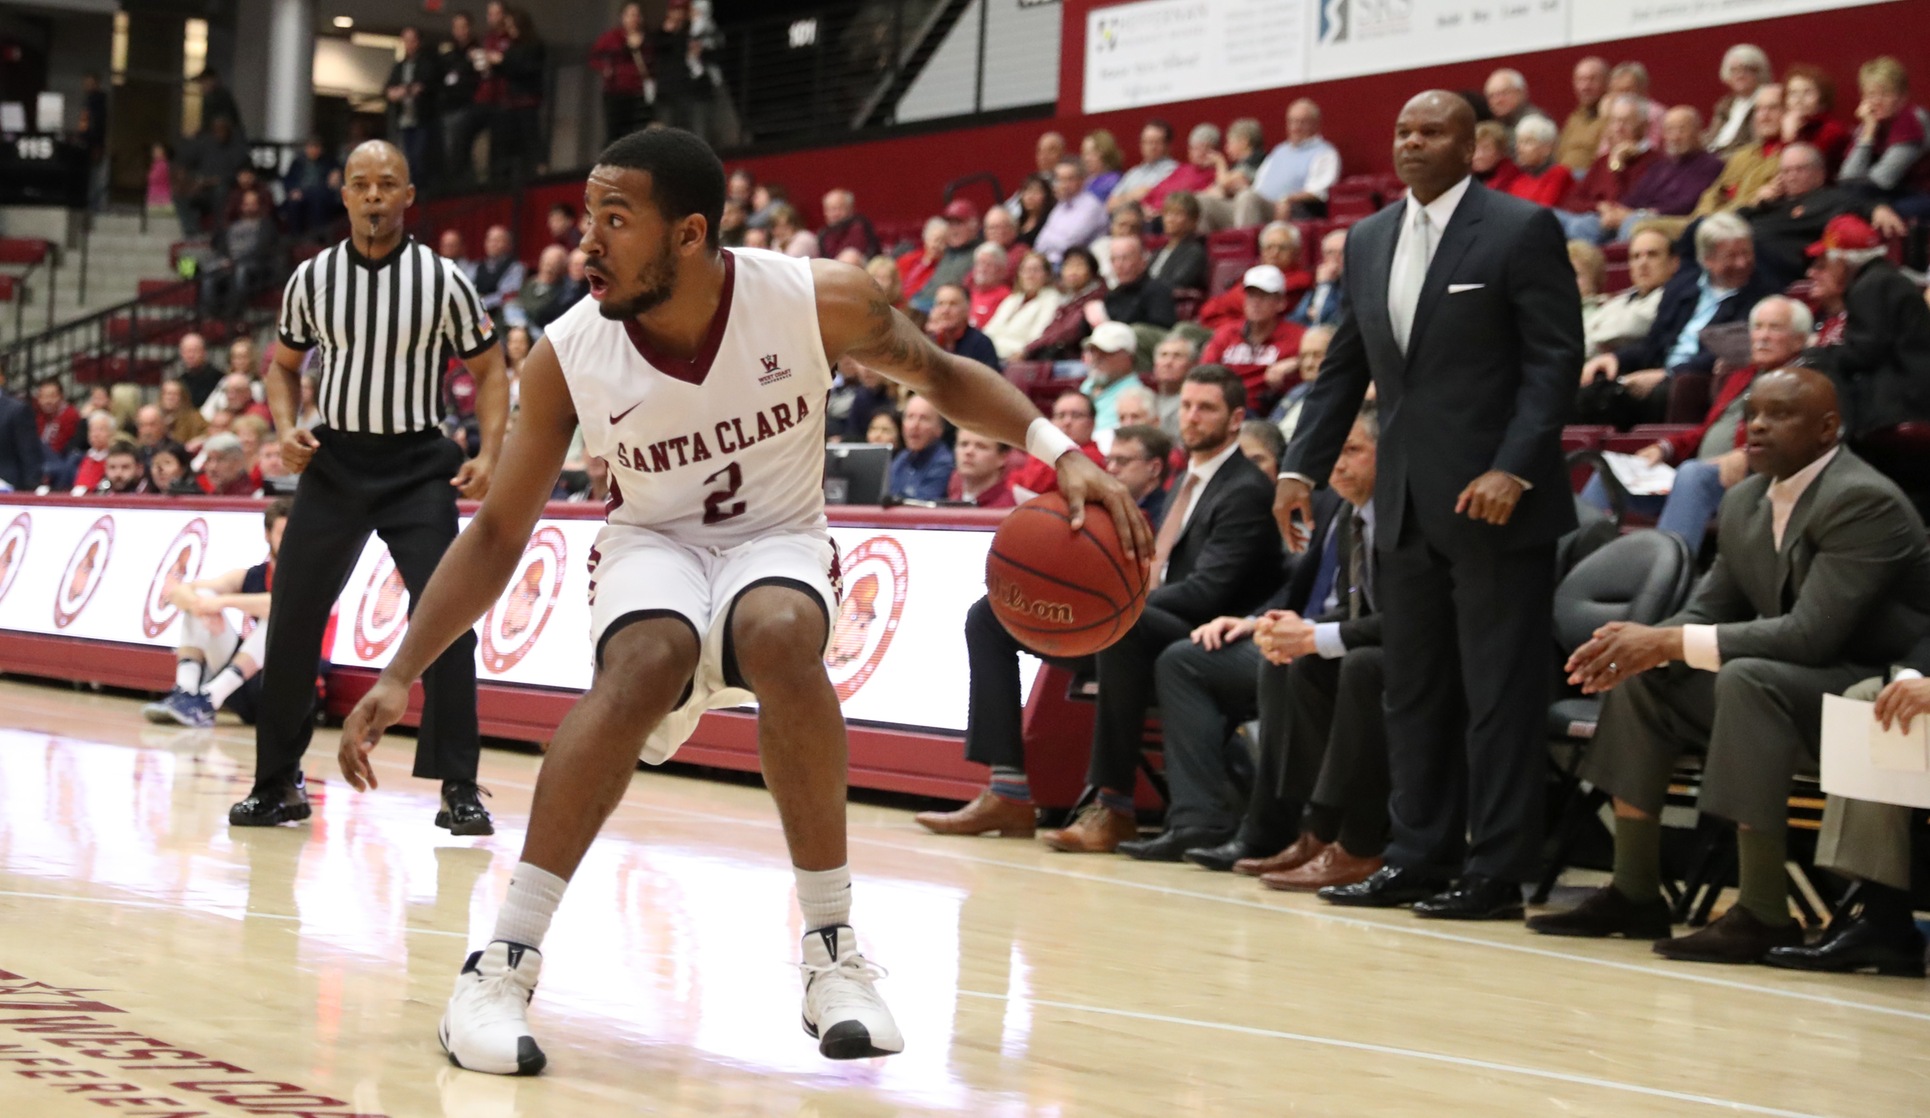 Men's Basketball Continues Three-Game Homestand Saturday Against San Diego